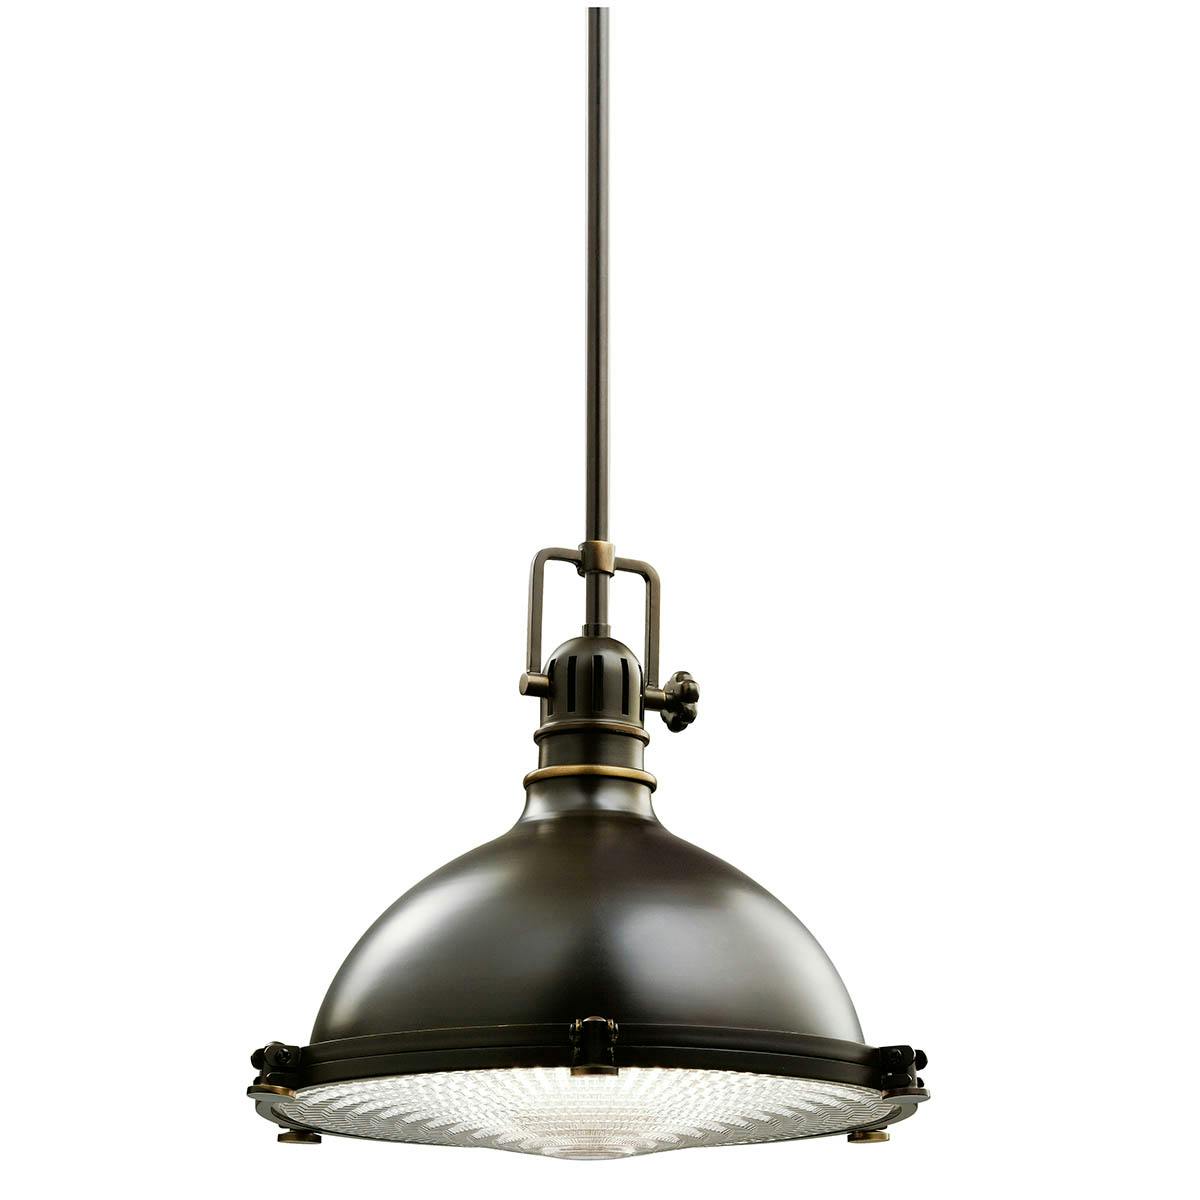 Hatteras Bay 12" Pendant Olde Bronze on a white background